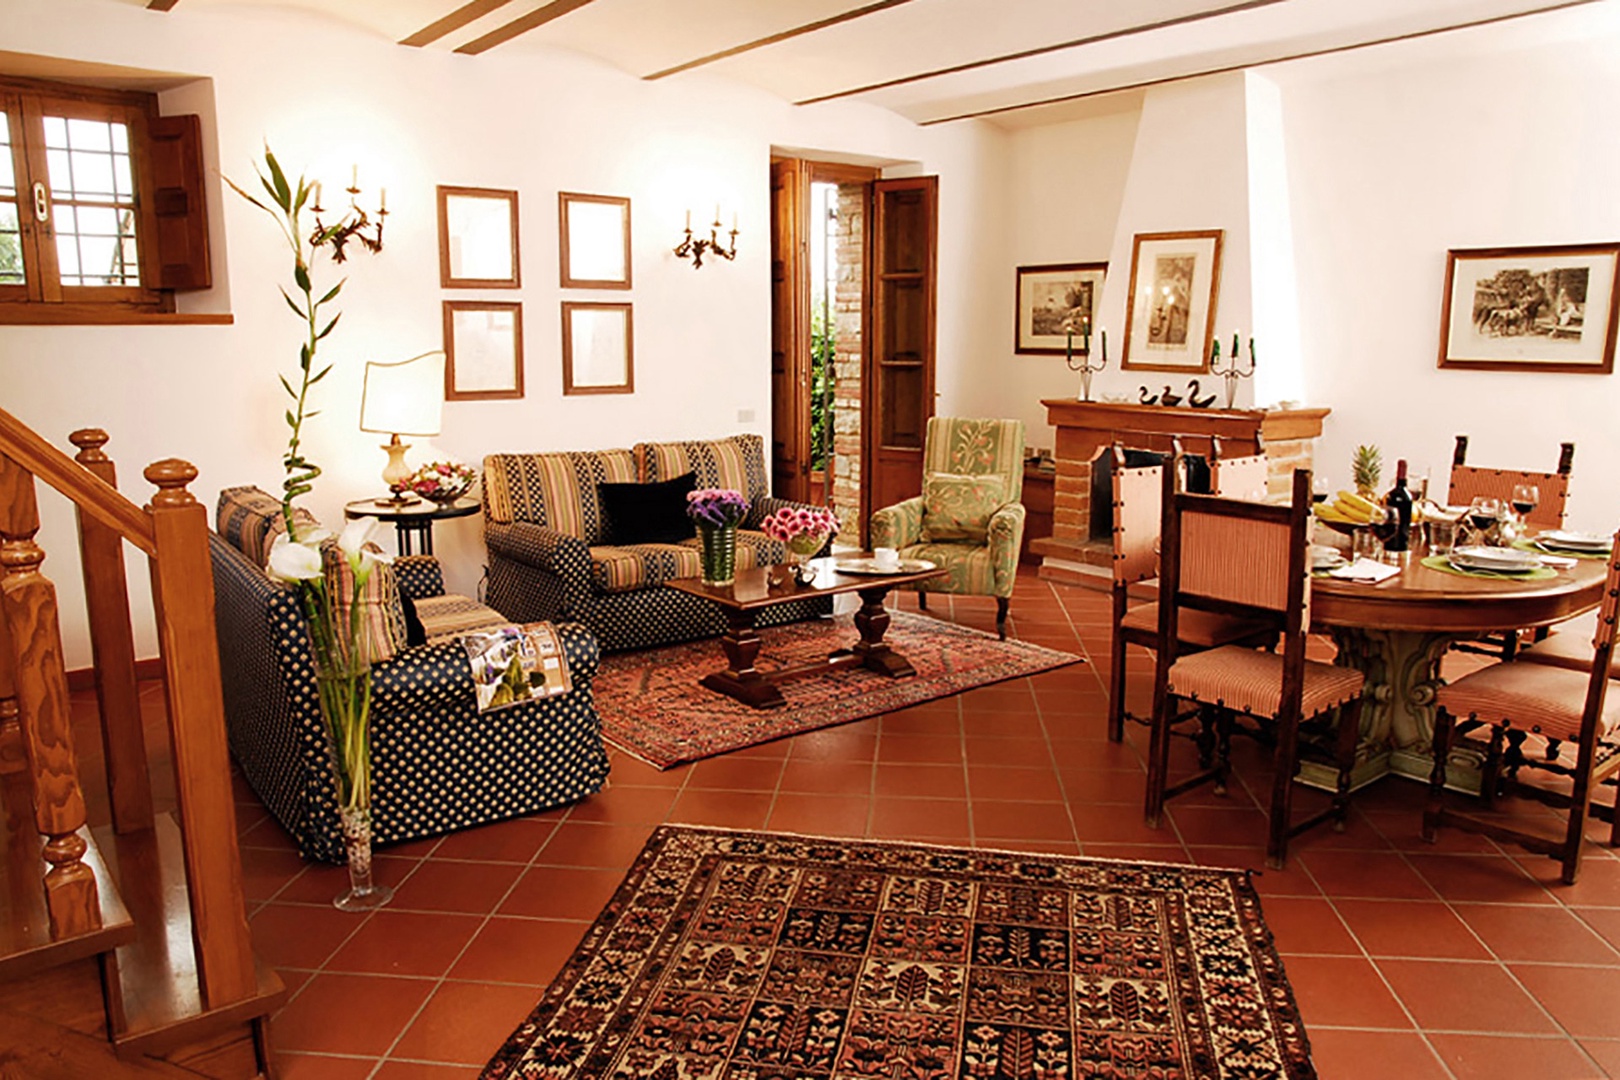 Large and comfortable living room in the Poggio apartment.